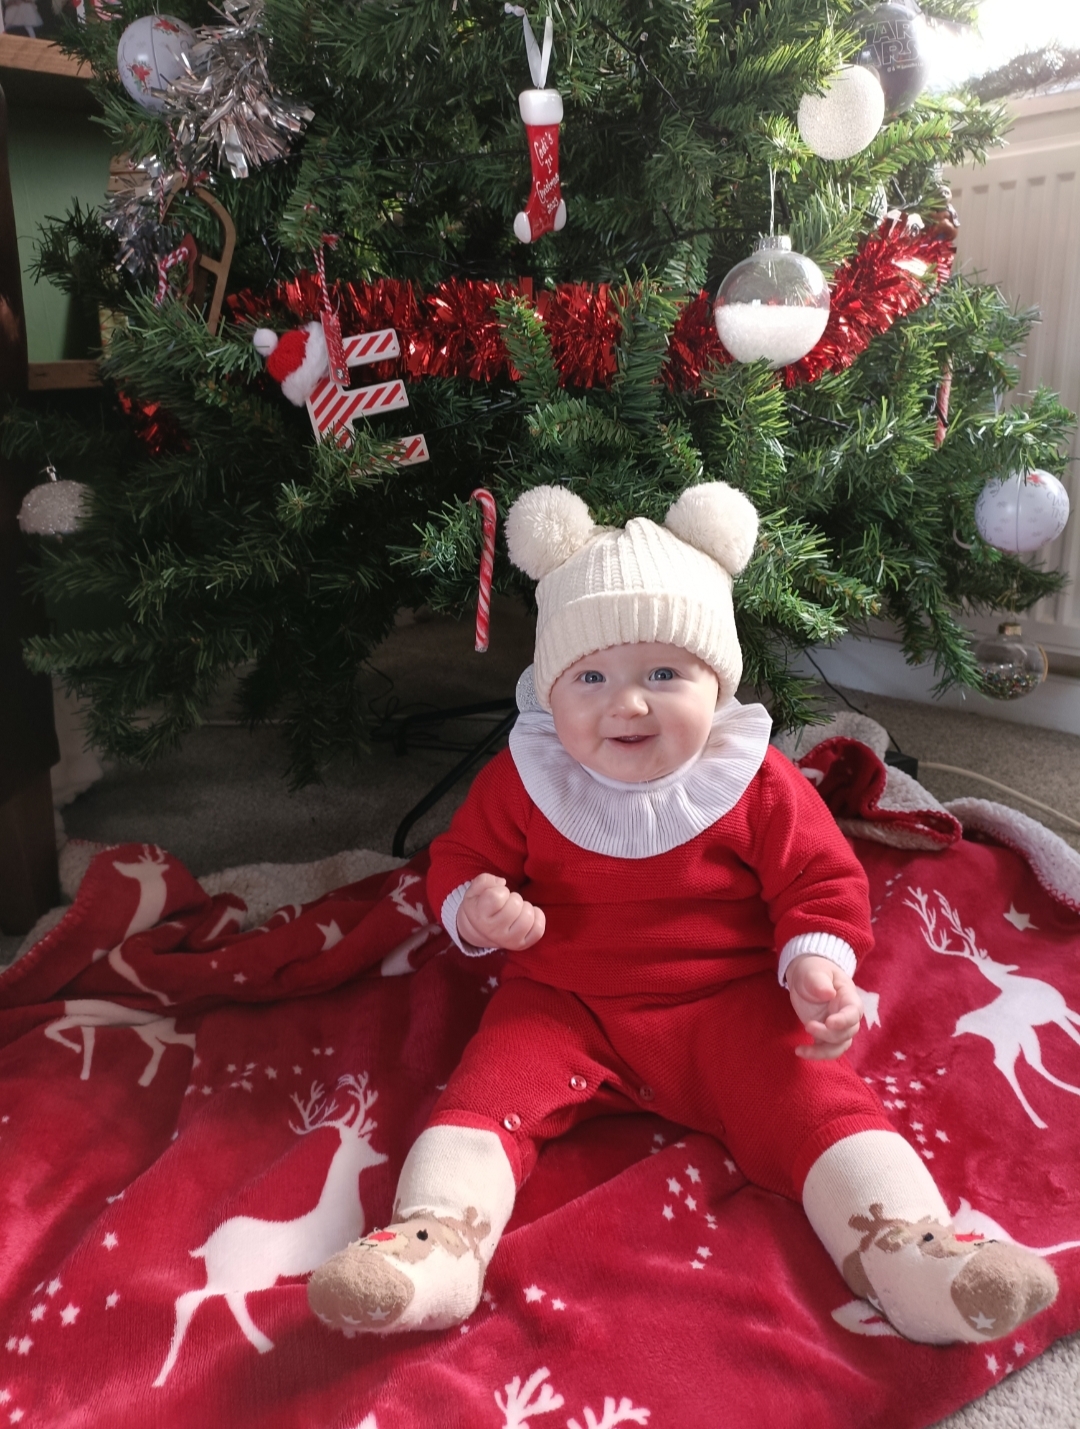 Eleri Llywarch, from Rhosesmor: Six-month-old Cadi Grace Amelia Parry, at home under her first Christmas tree.